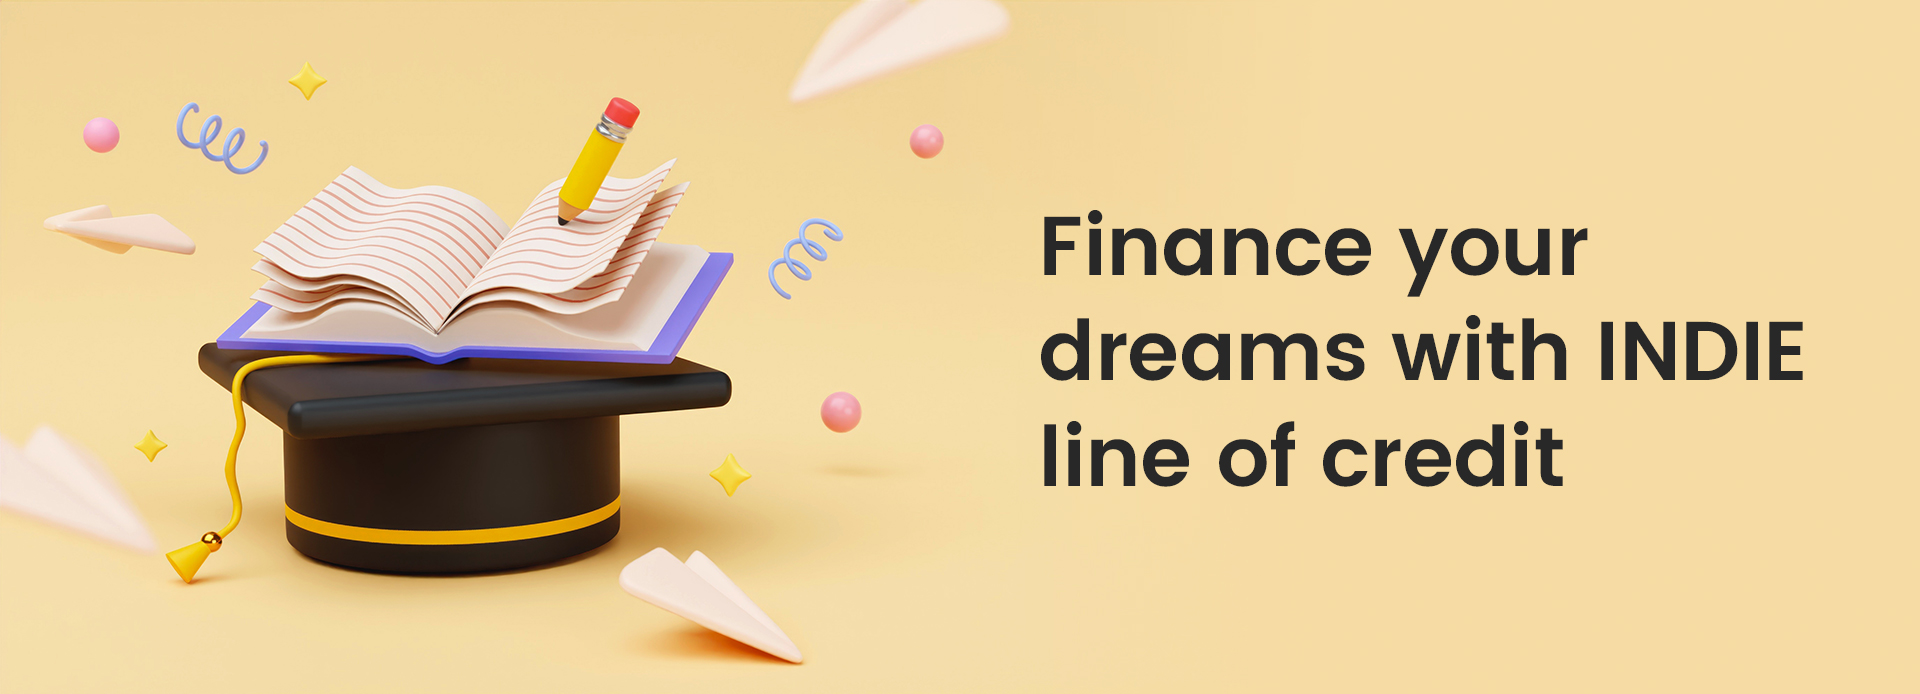 Using INDIE’s line of credit to finance your dreams